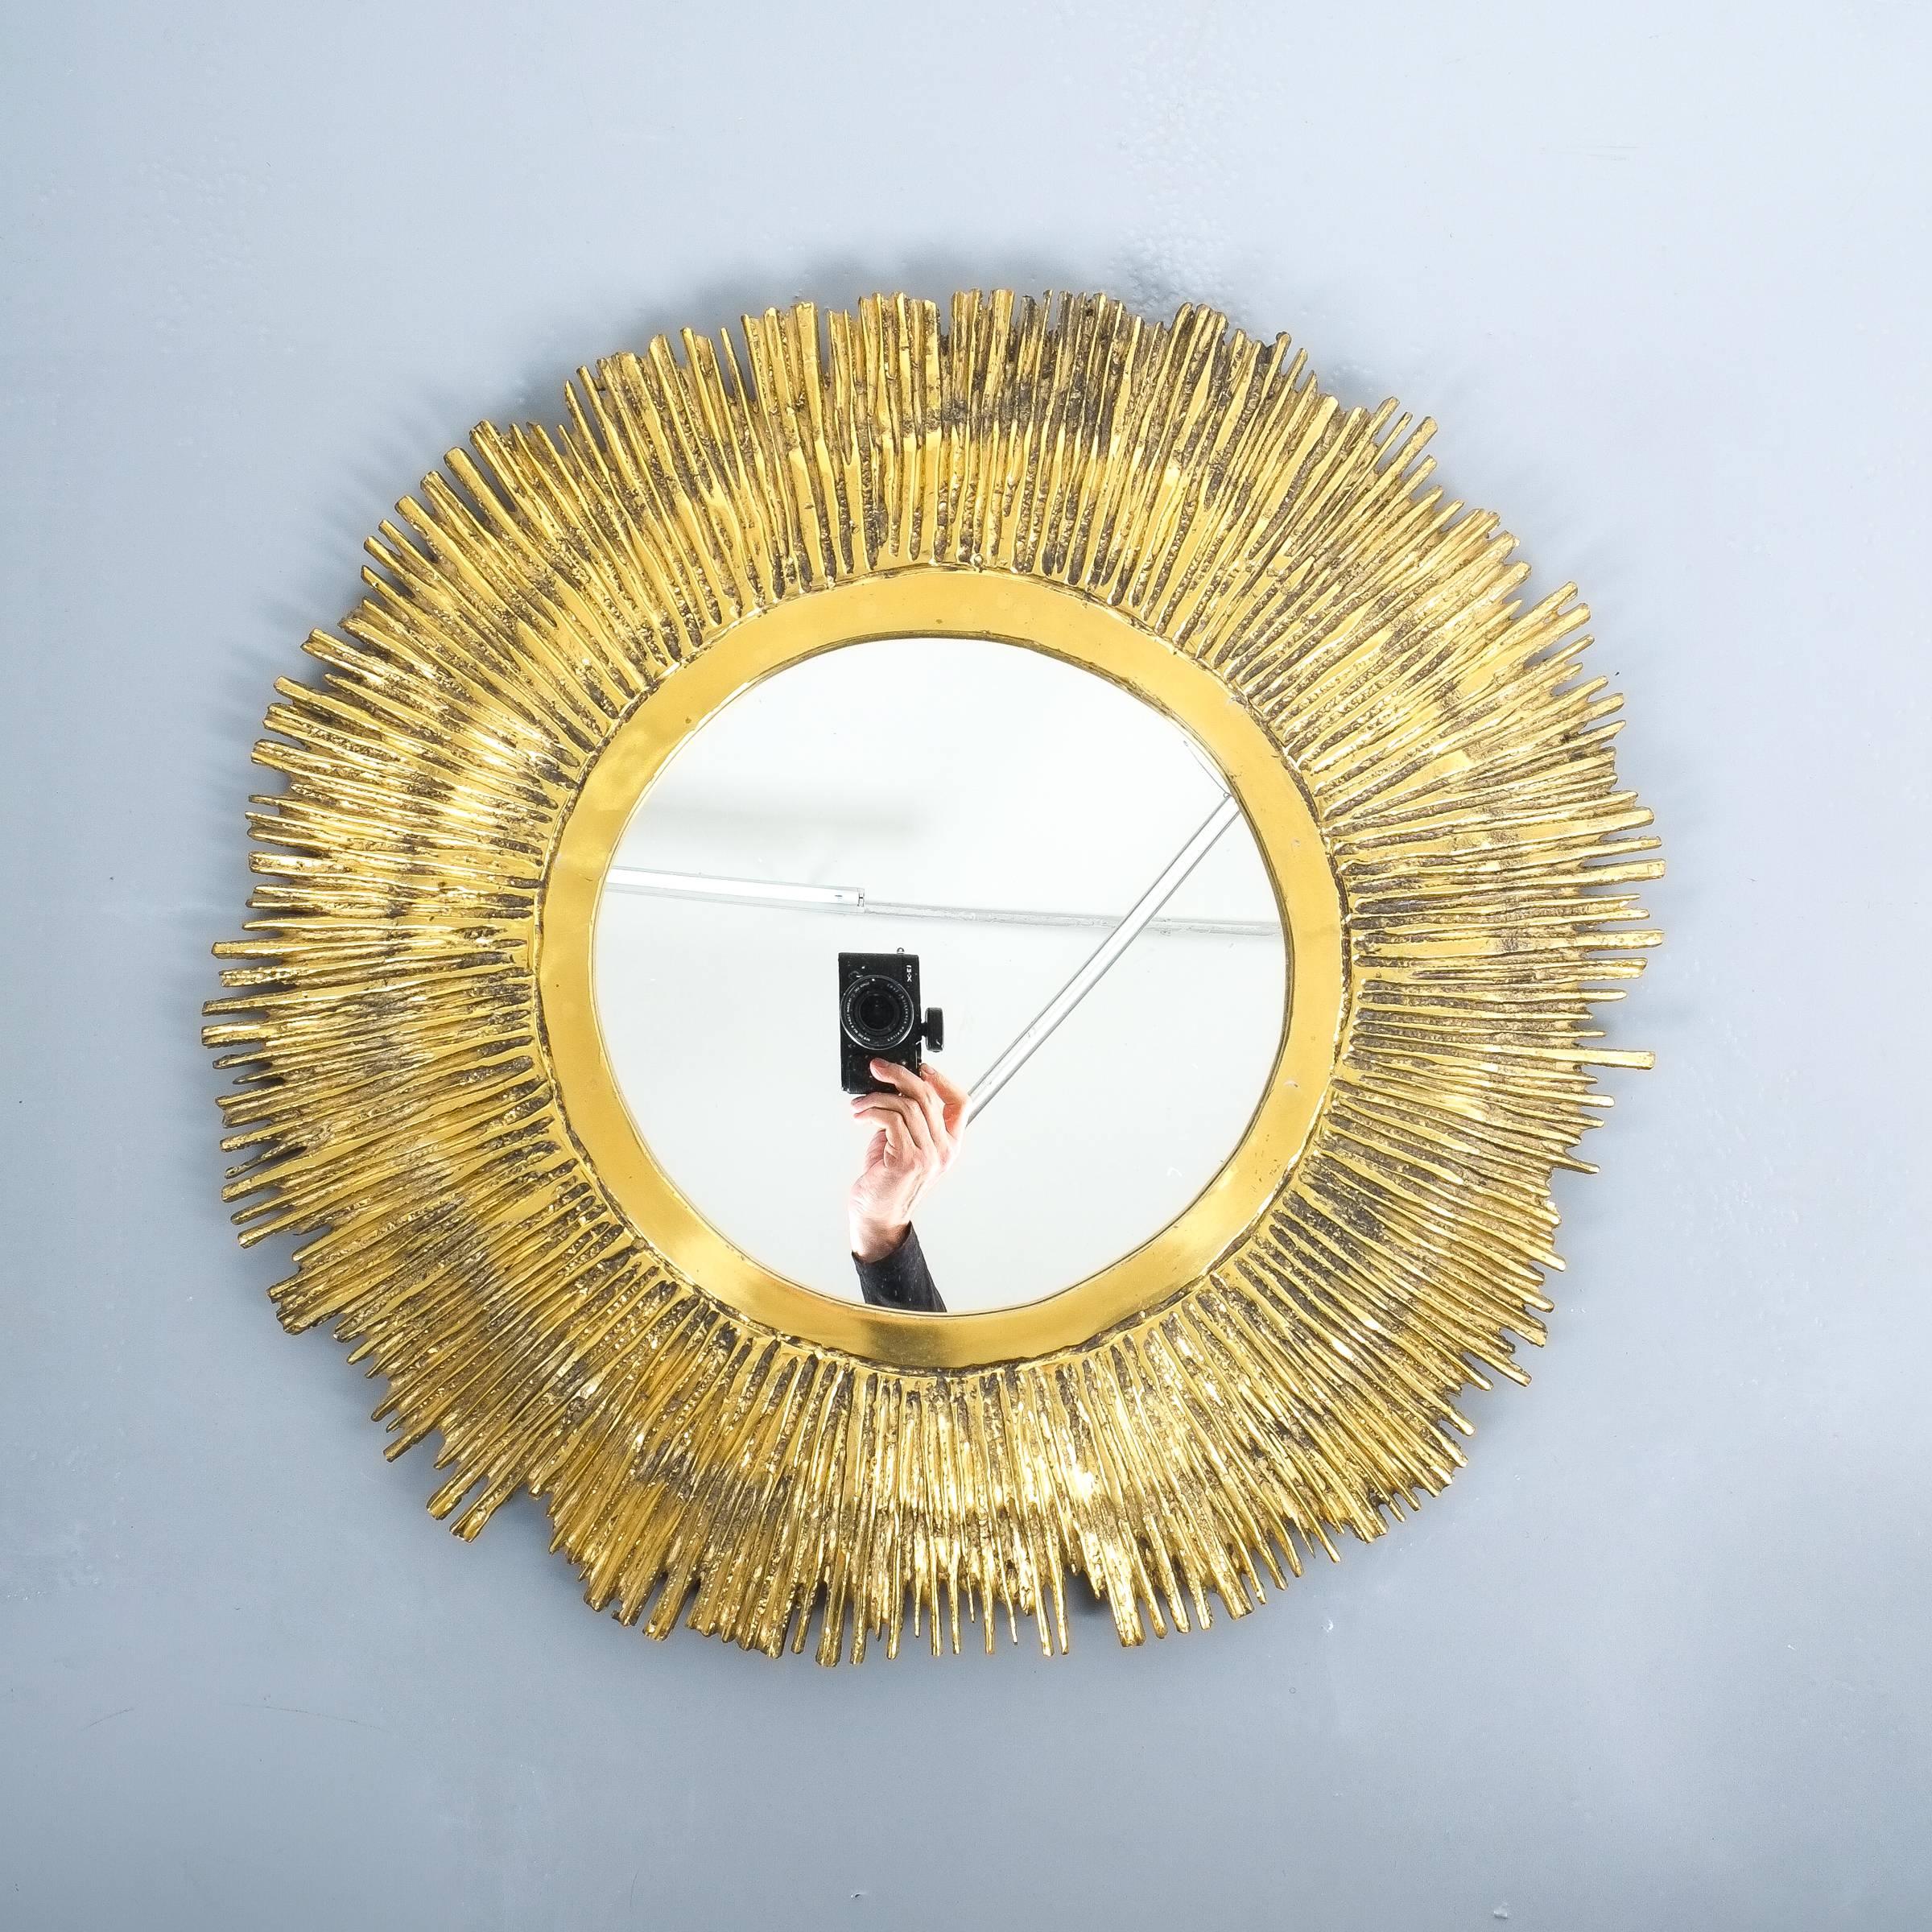 Impressive 24 inch solid brass mirror, in the style of Curtis Jere, circa 1955 featuring a handmade heavy and solid cast brass frame with a 11.8 inch mirror inlay. The mirror weighs 8-10kg approx. Excellent condition.